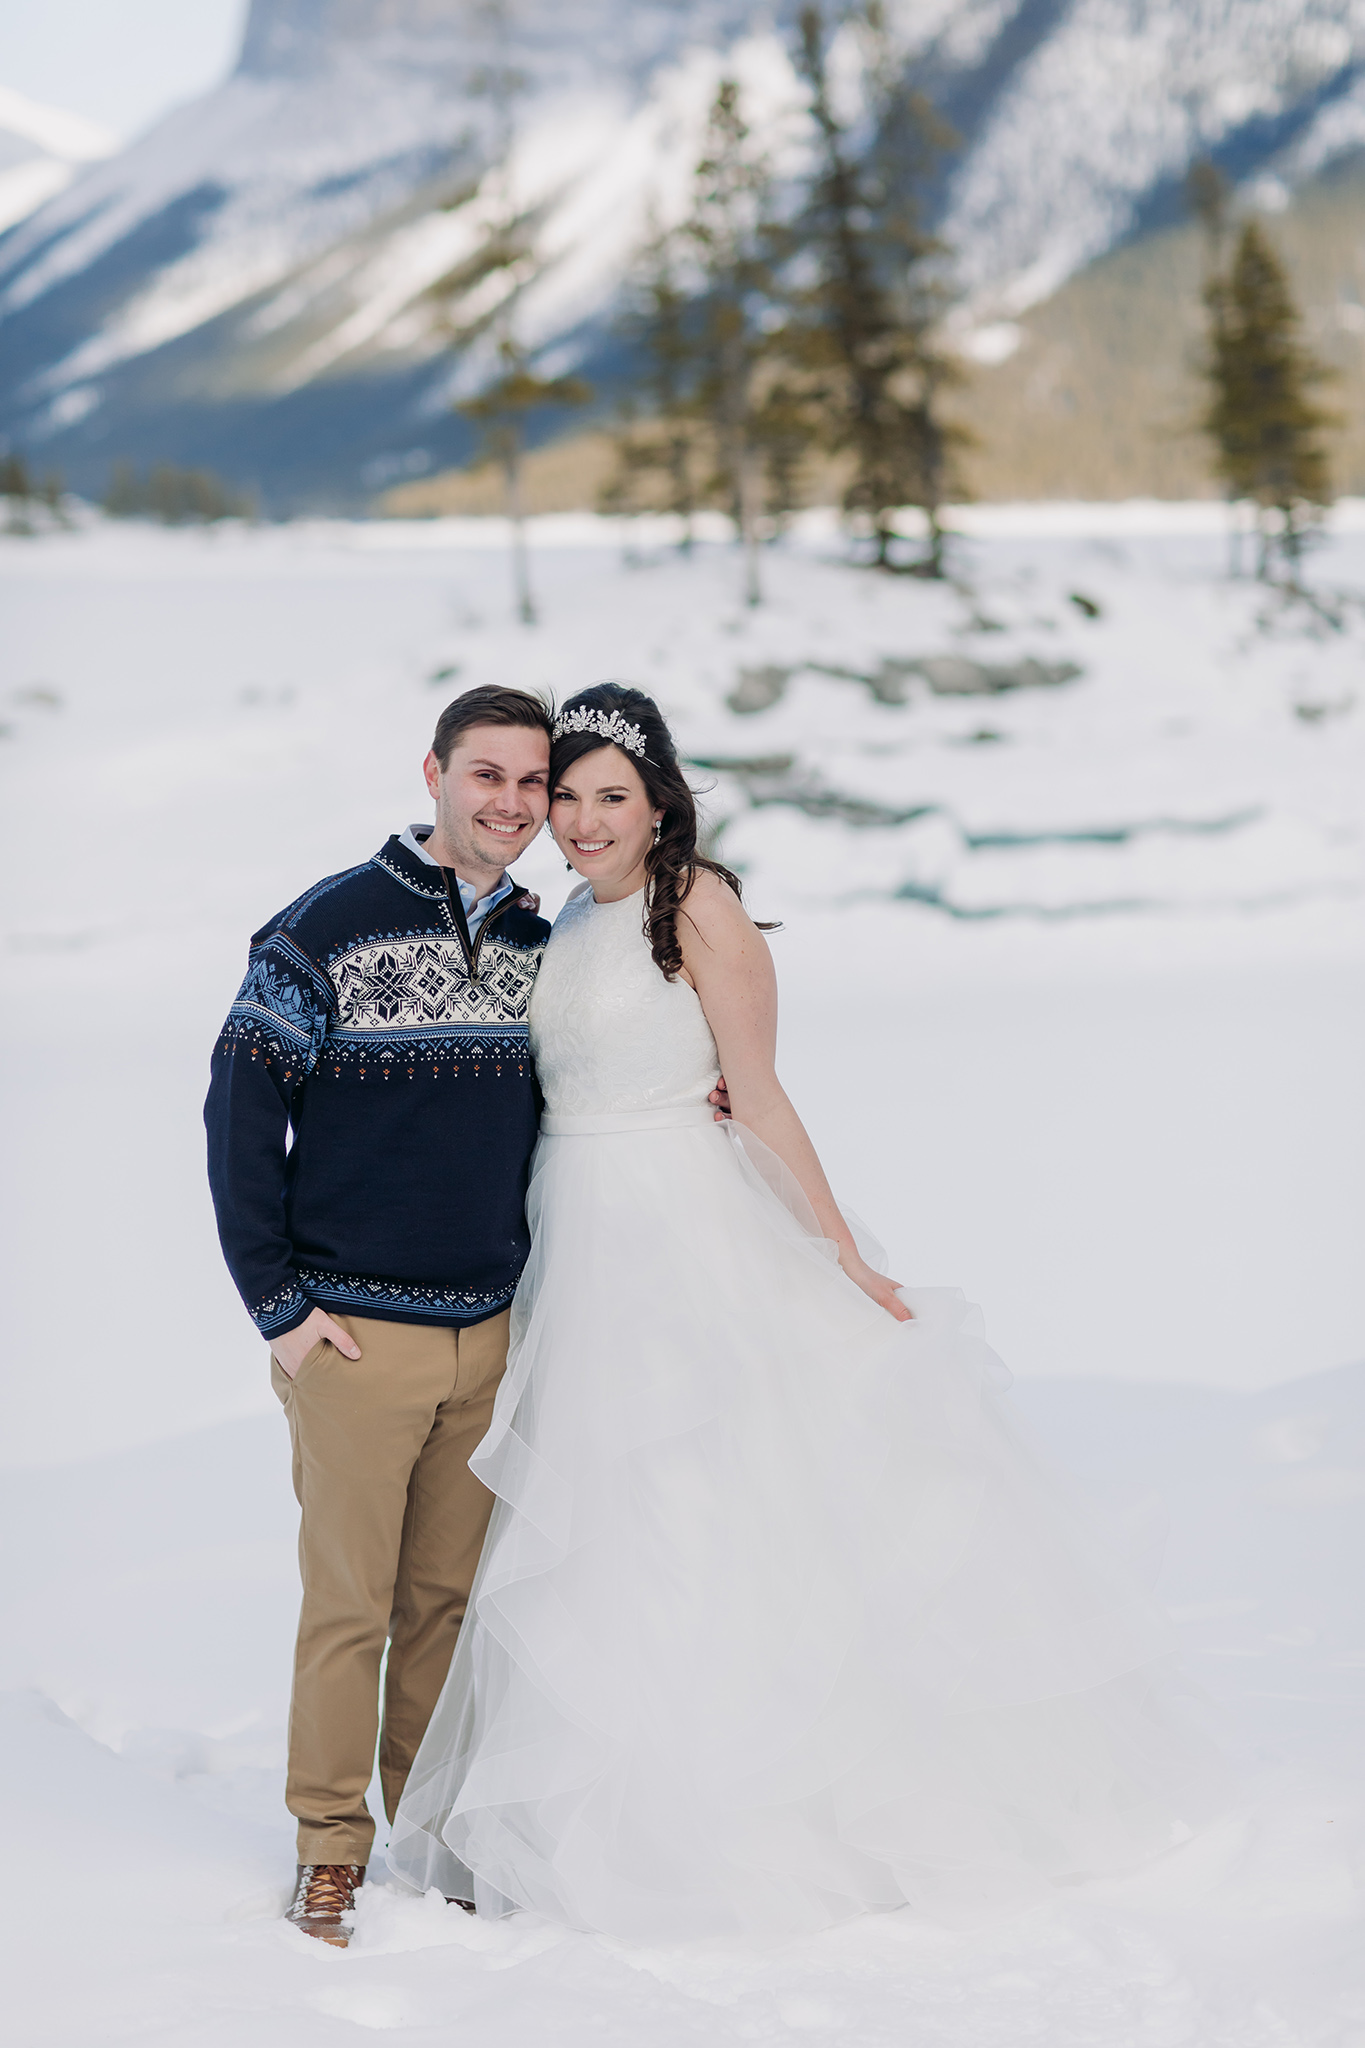 Lake Minnewanka Banff wedding portraits winter in the mountains photographed by ENV Photography